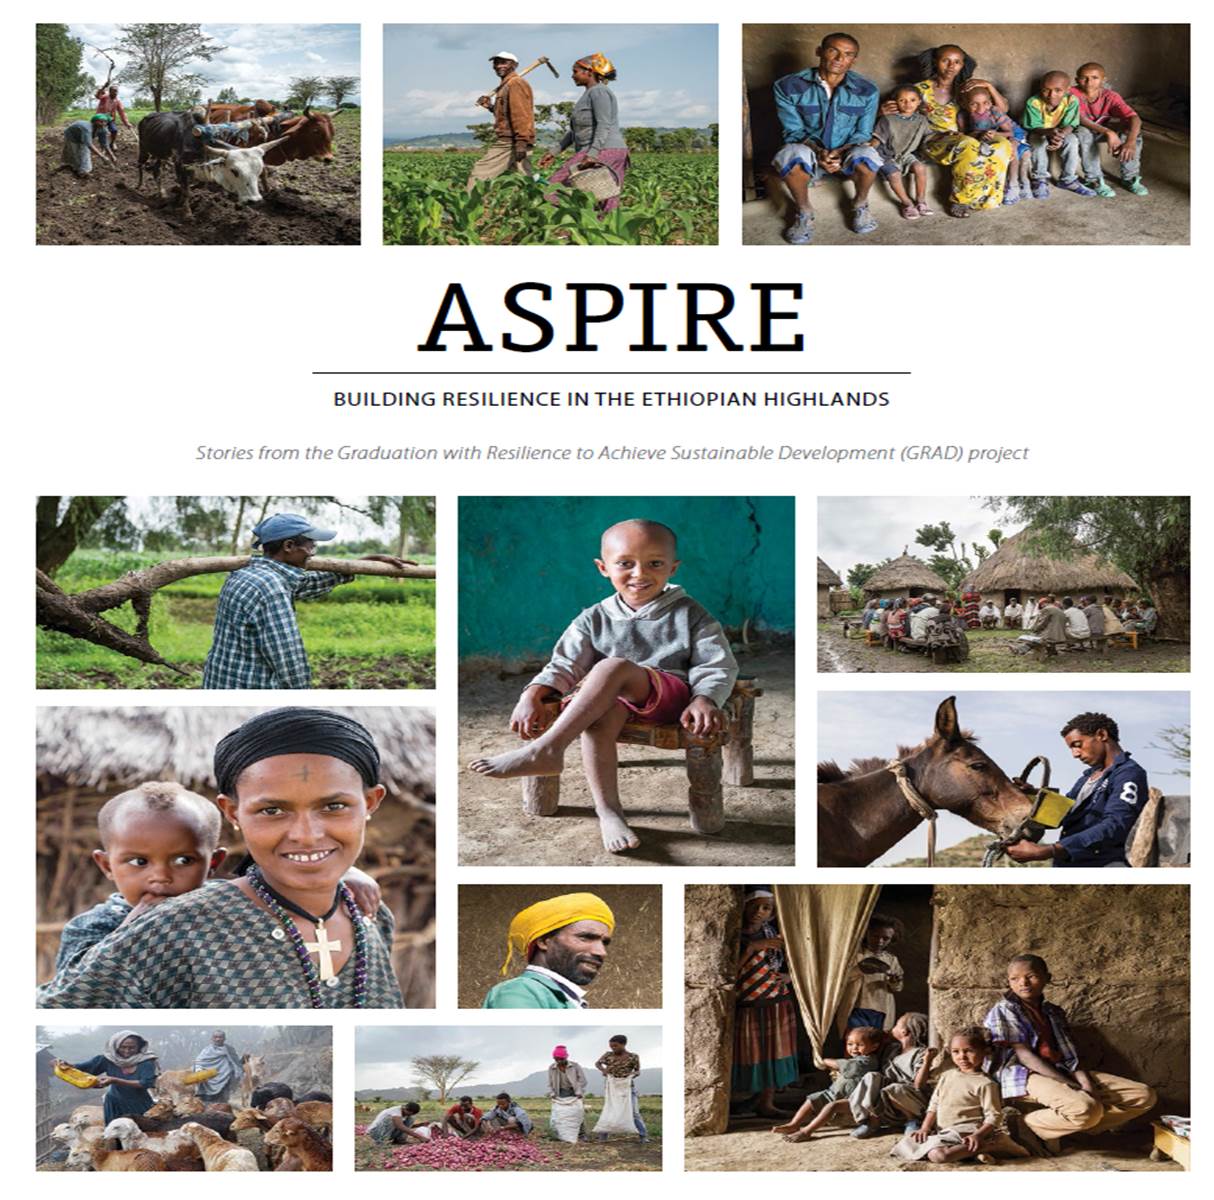 Aspire: Building Resilience in the Ethiopian Highlands